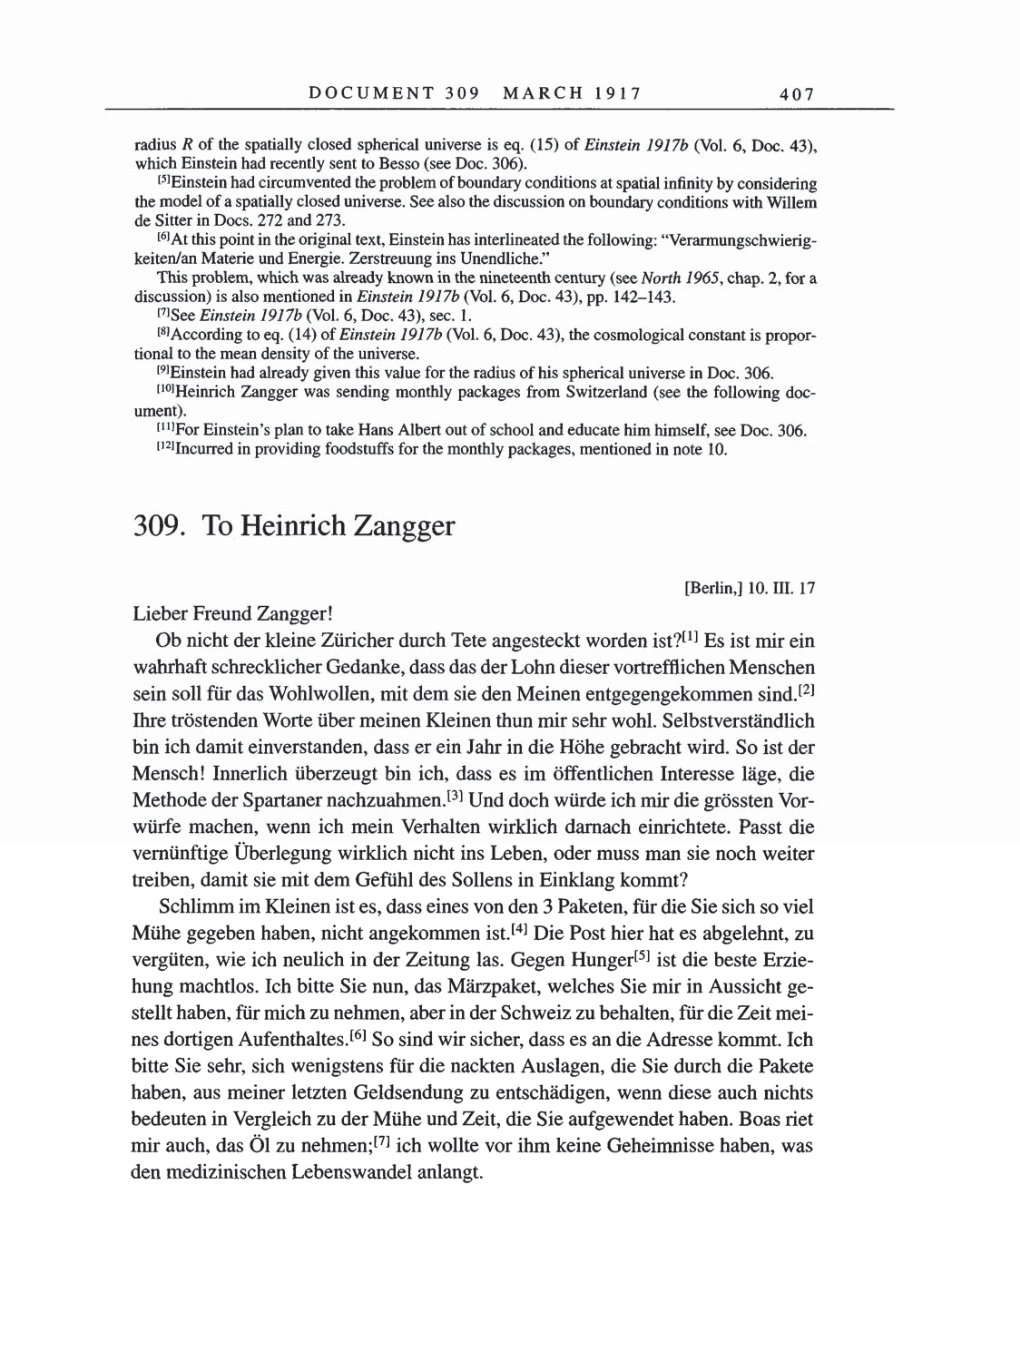 Volume 8, Part A: The Berlin Years: Correspondence 1914-1917 page 407